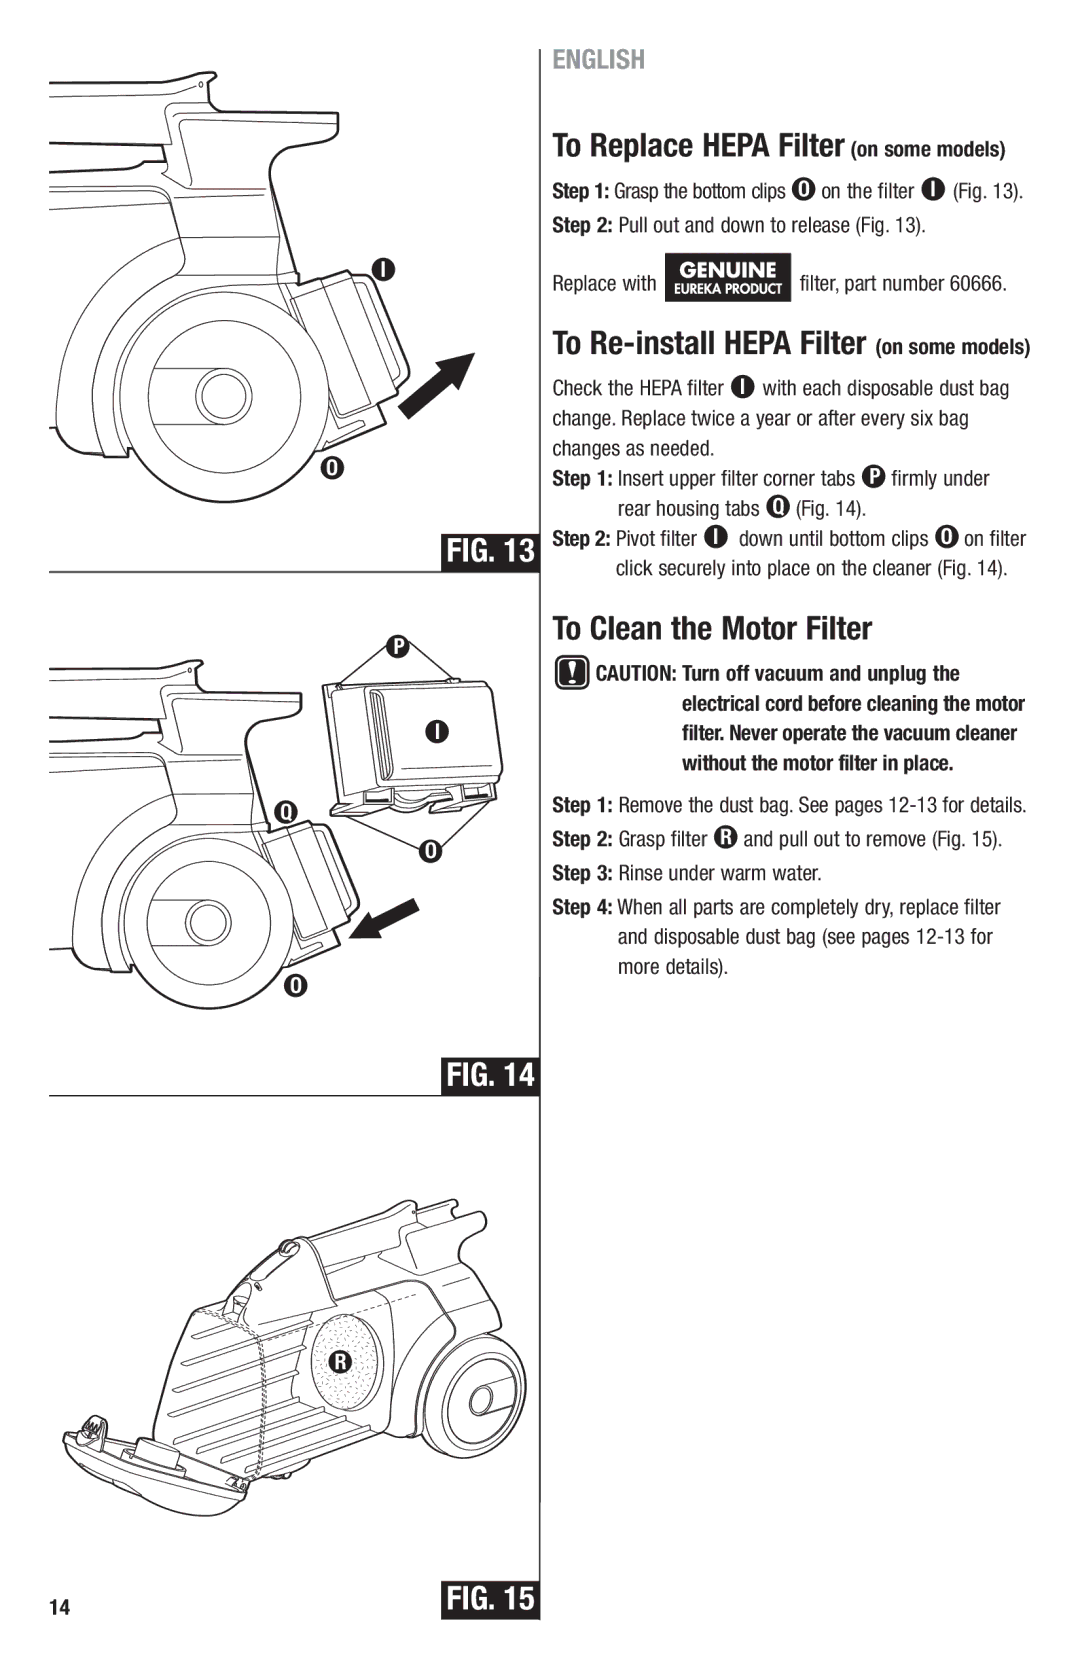 Eureka 3680, 3670 manual To Replace Hepa Filter on some models, To Re-install Hepa Filter on some models, Changes as needed 